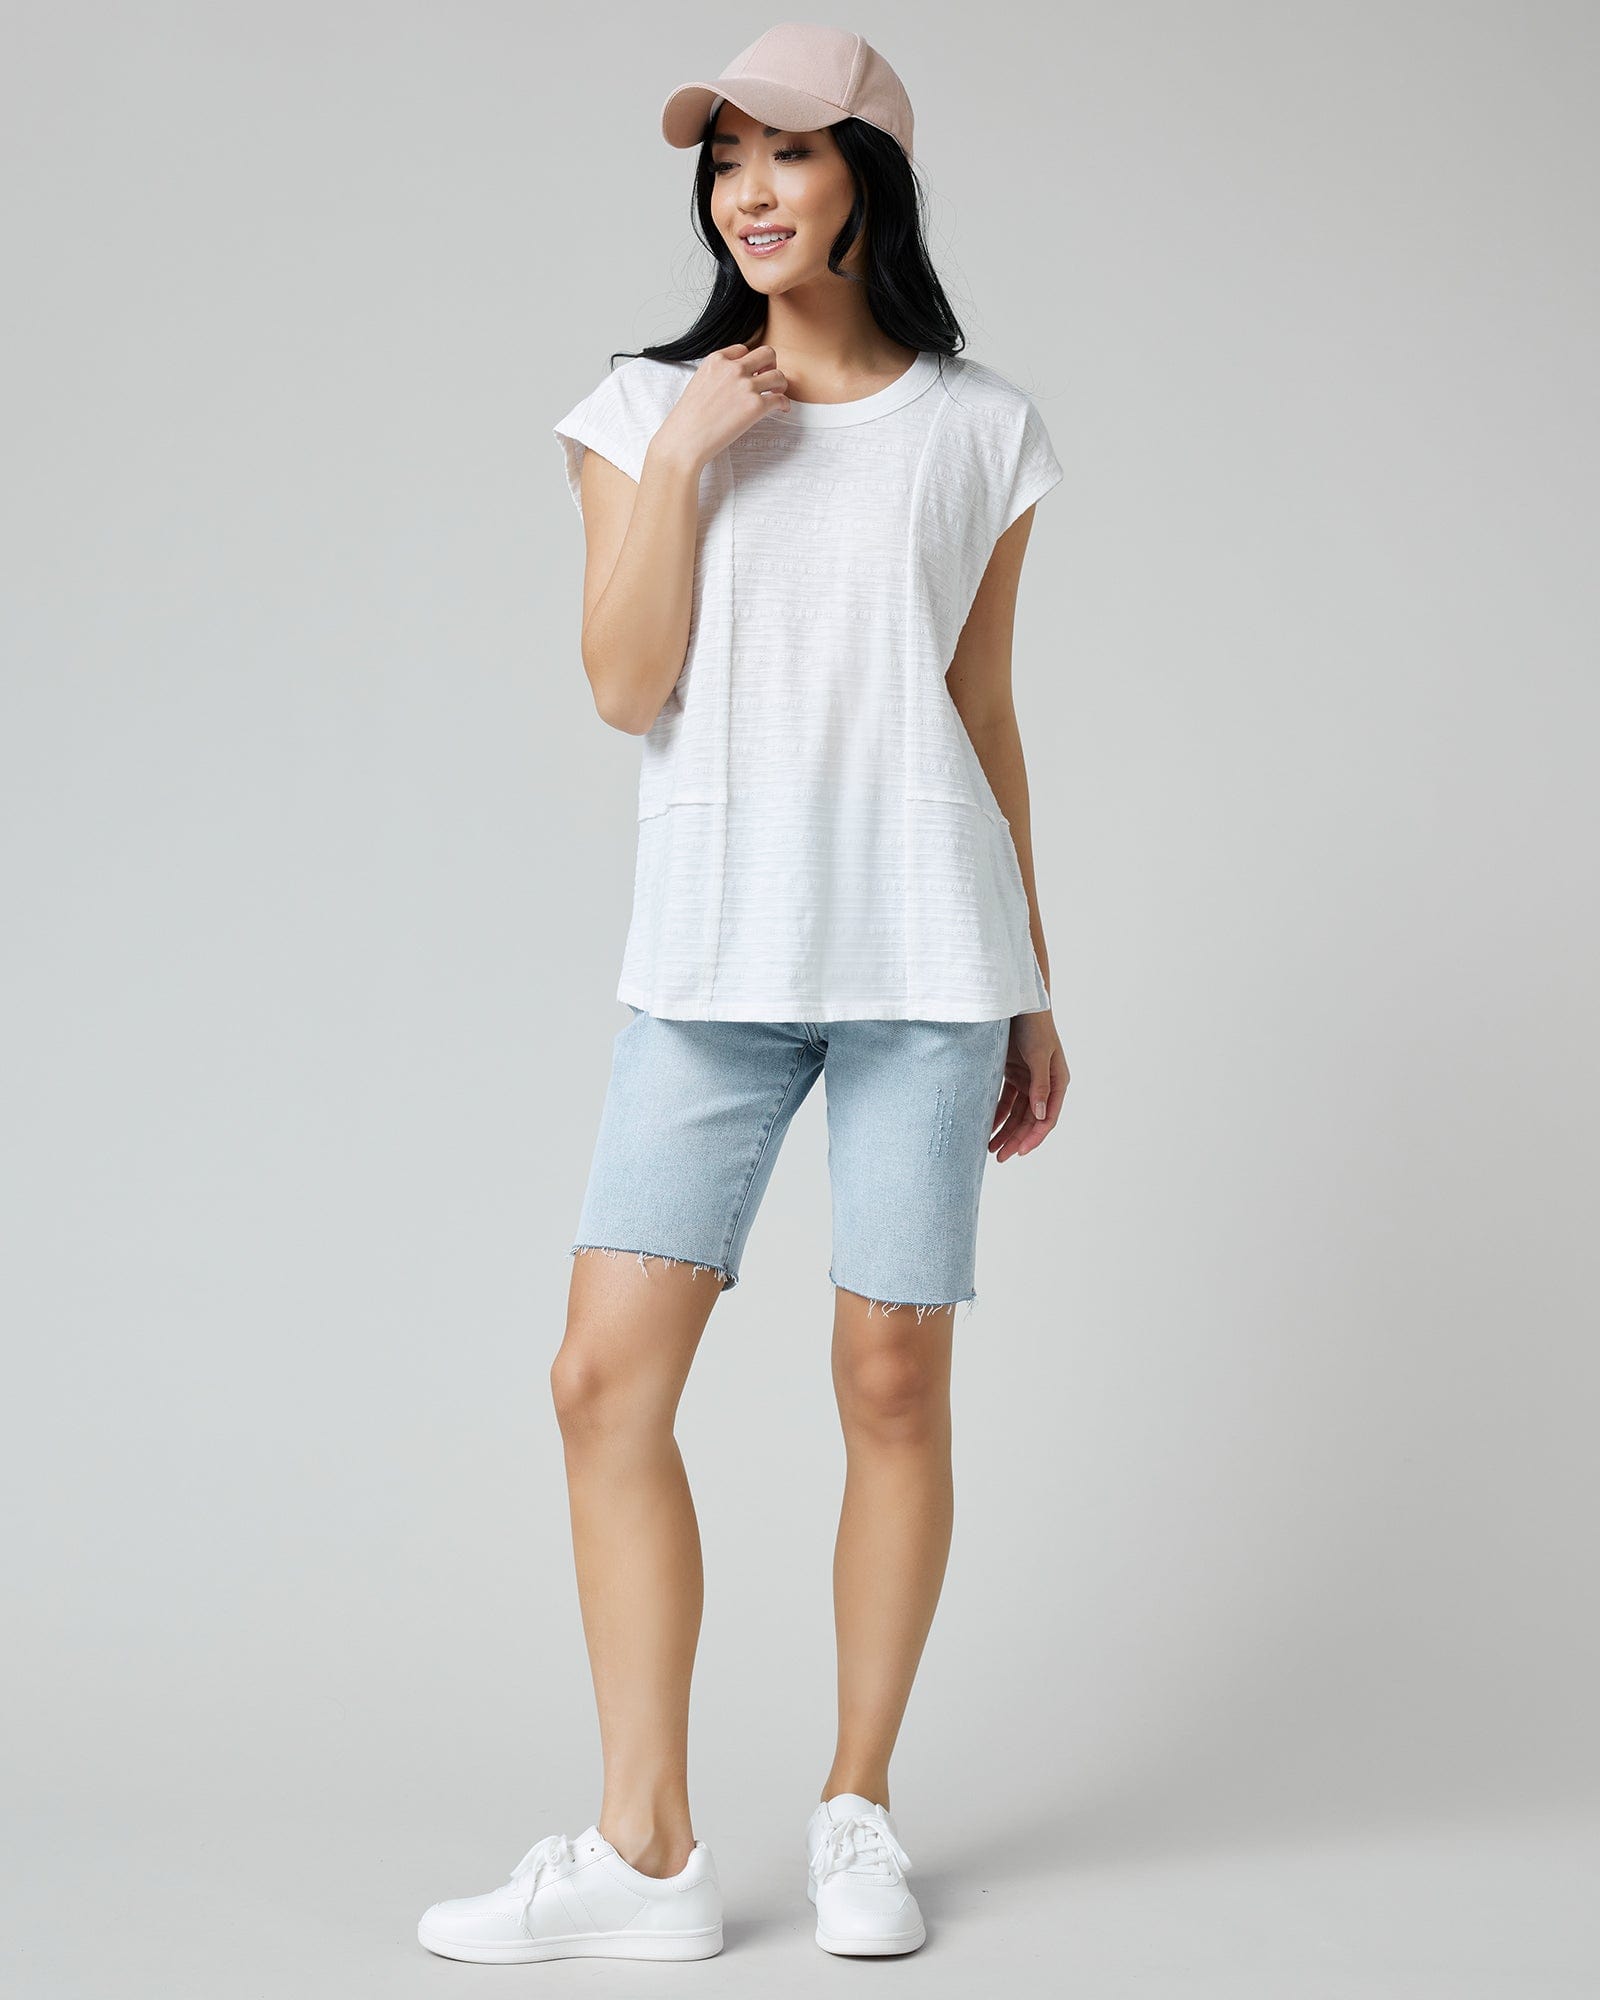 Woman in a white short sleeve t-shirt